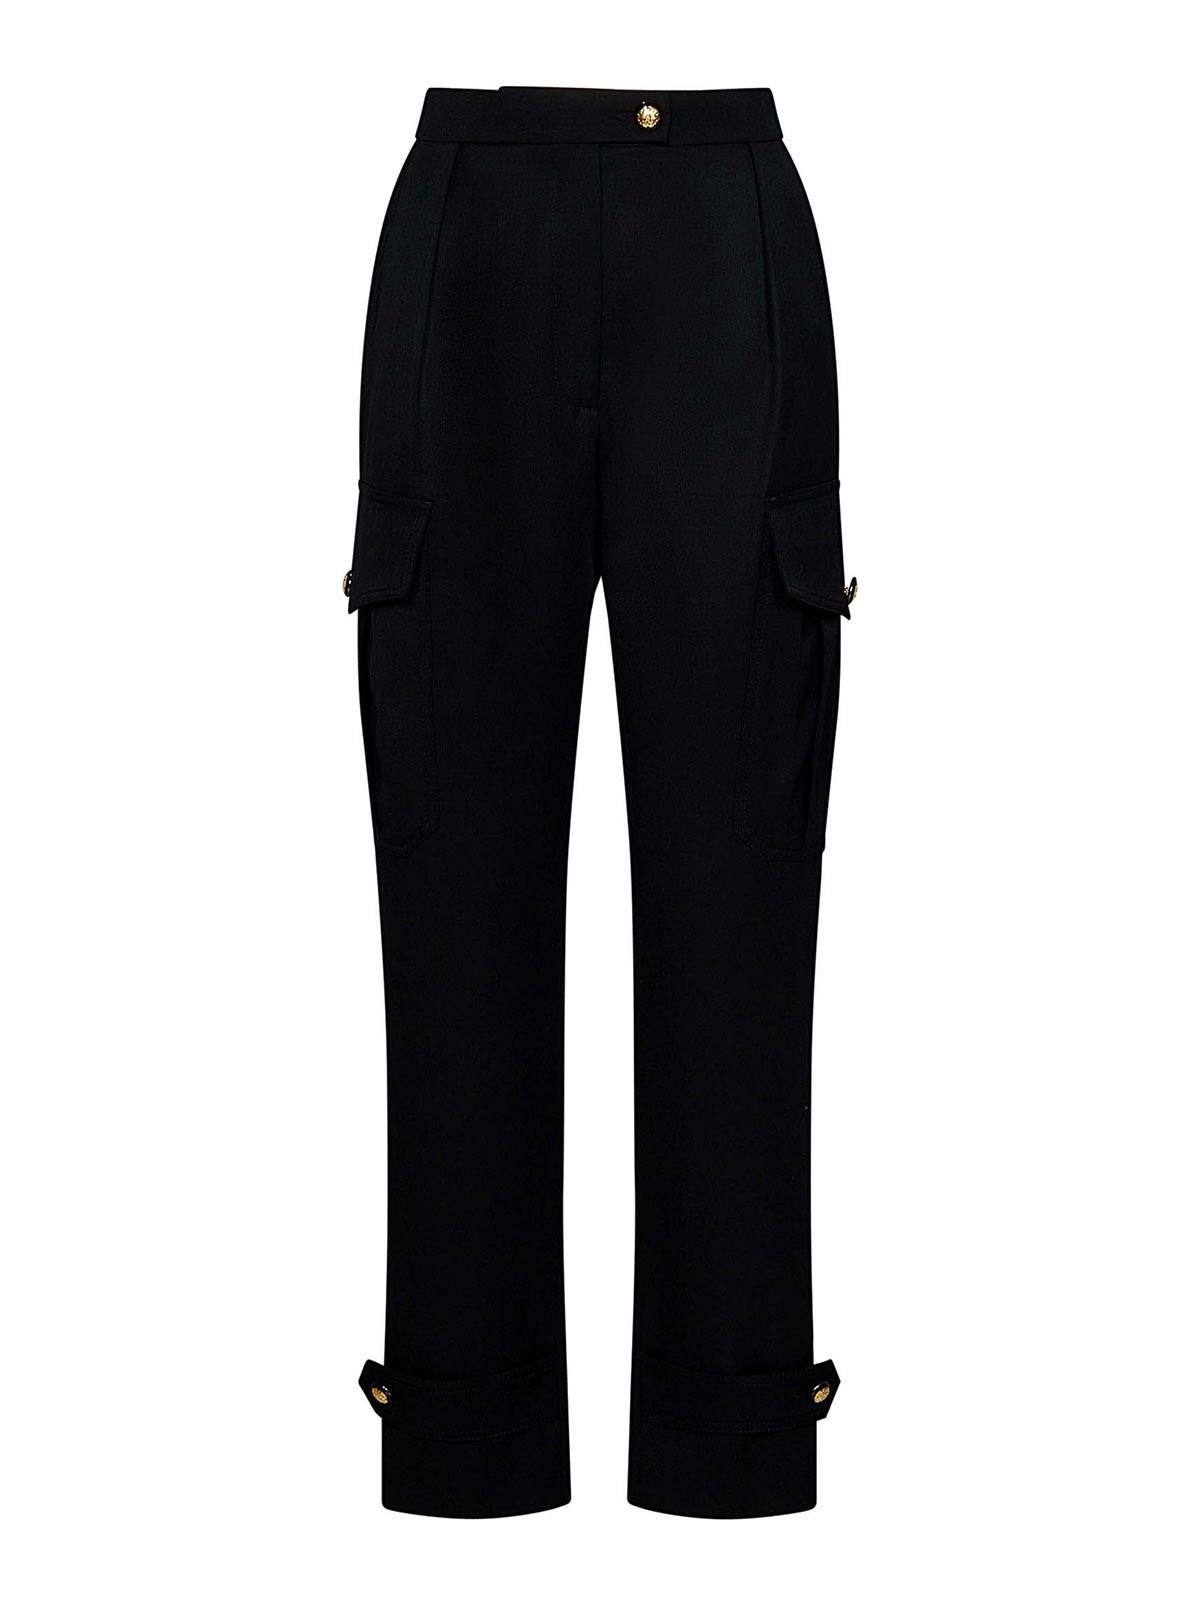 Alexander Mcqueen Black Wool Military Trousers With Pockets